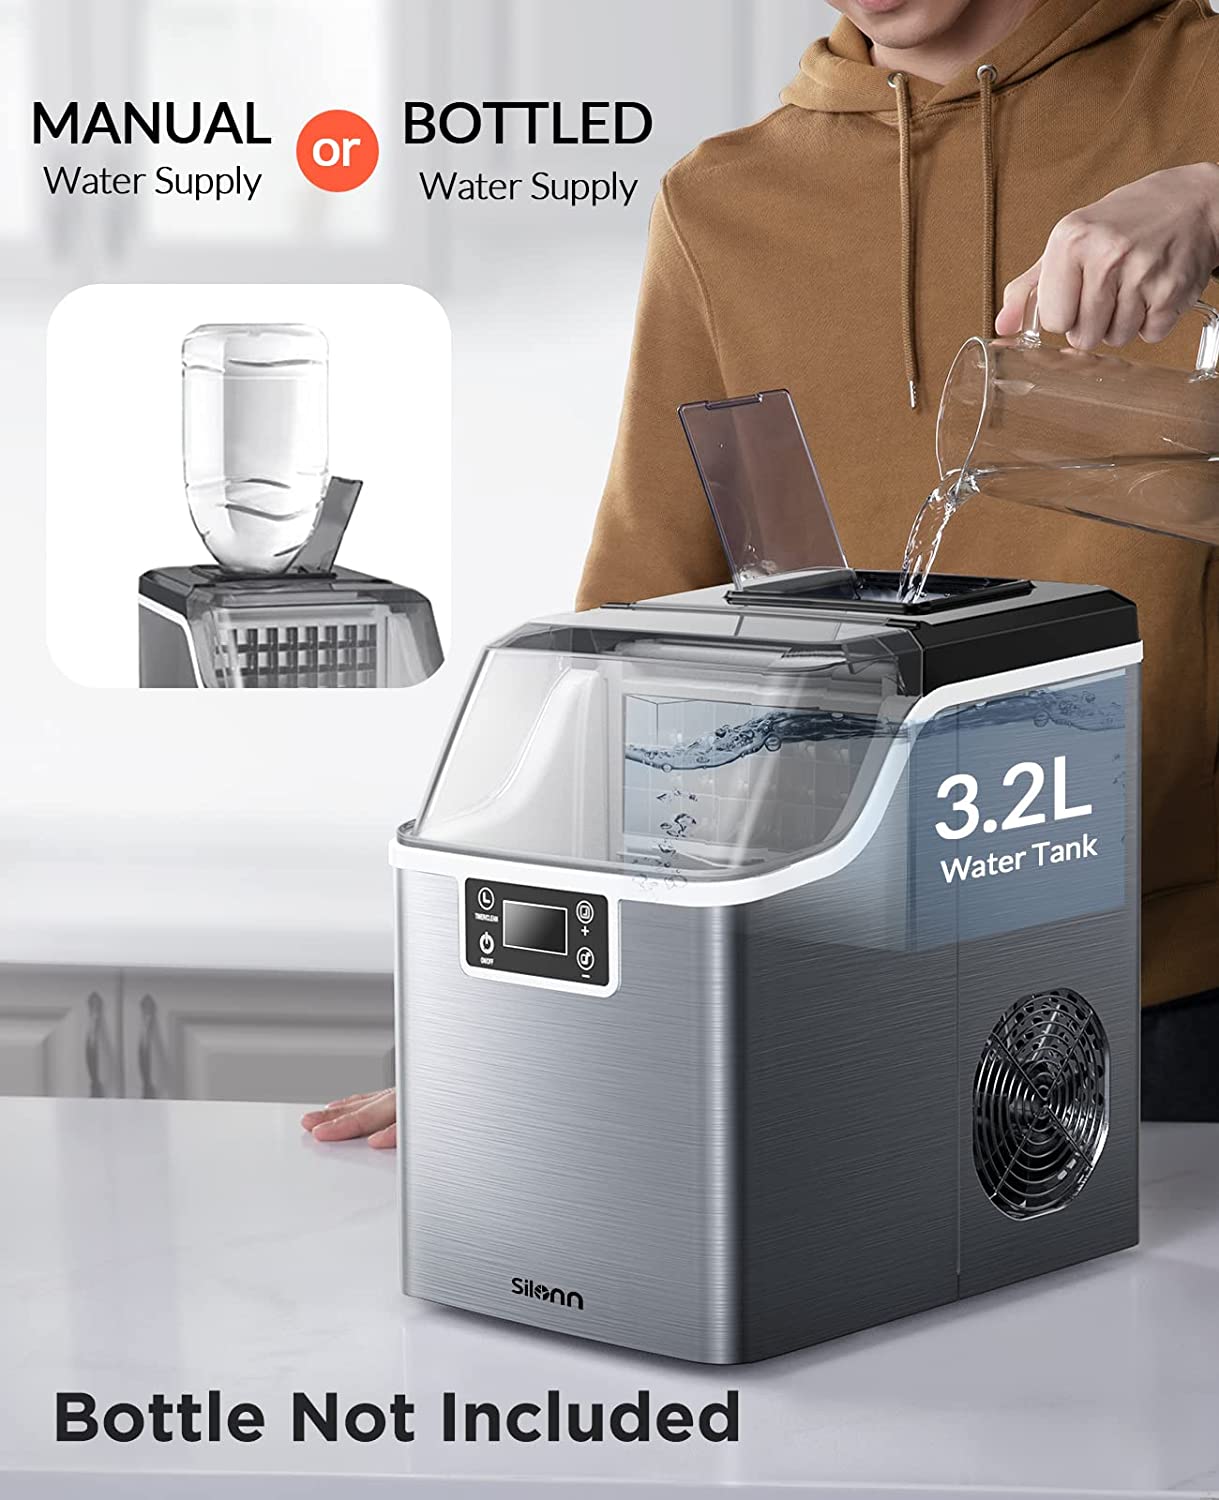 How To Setup And Use Silonn Countertop Ice Maker 